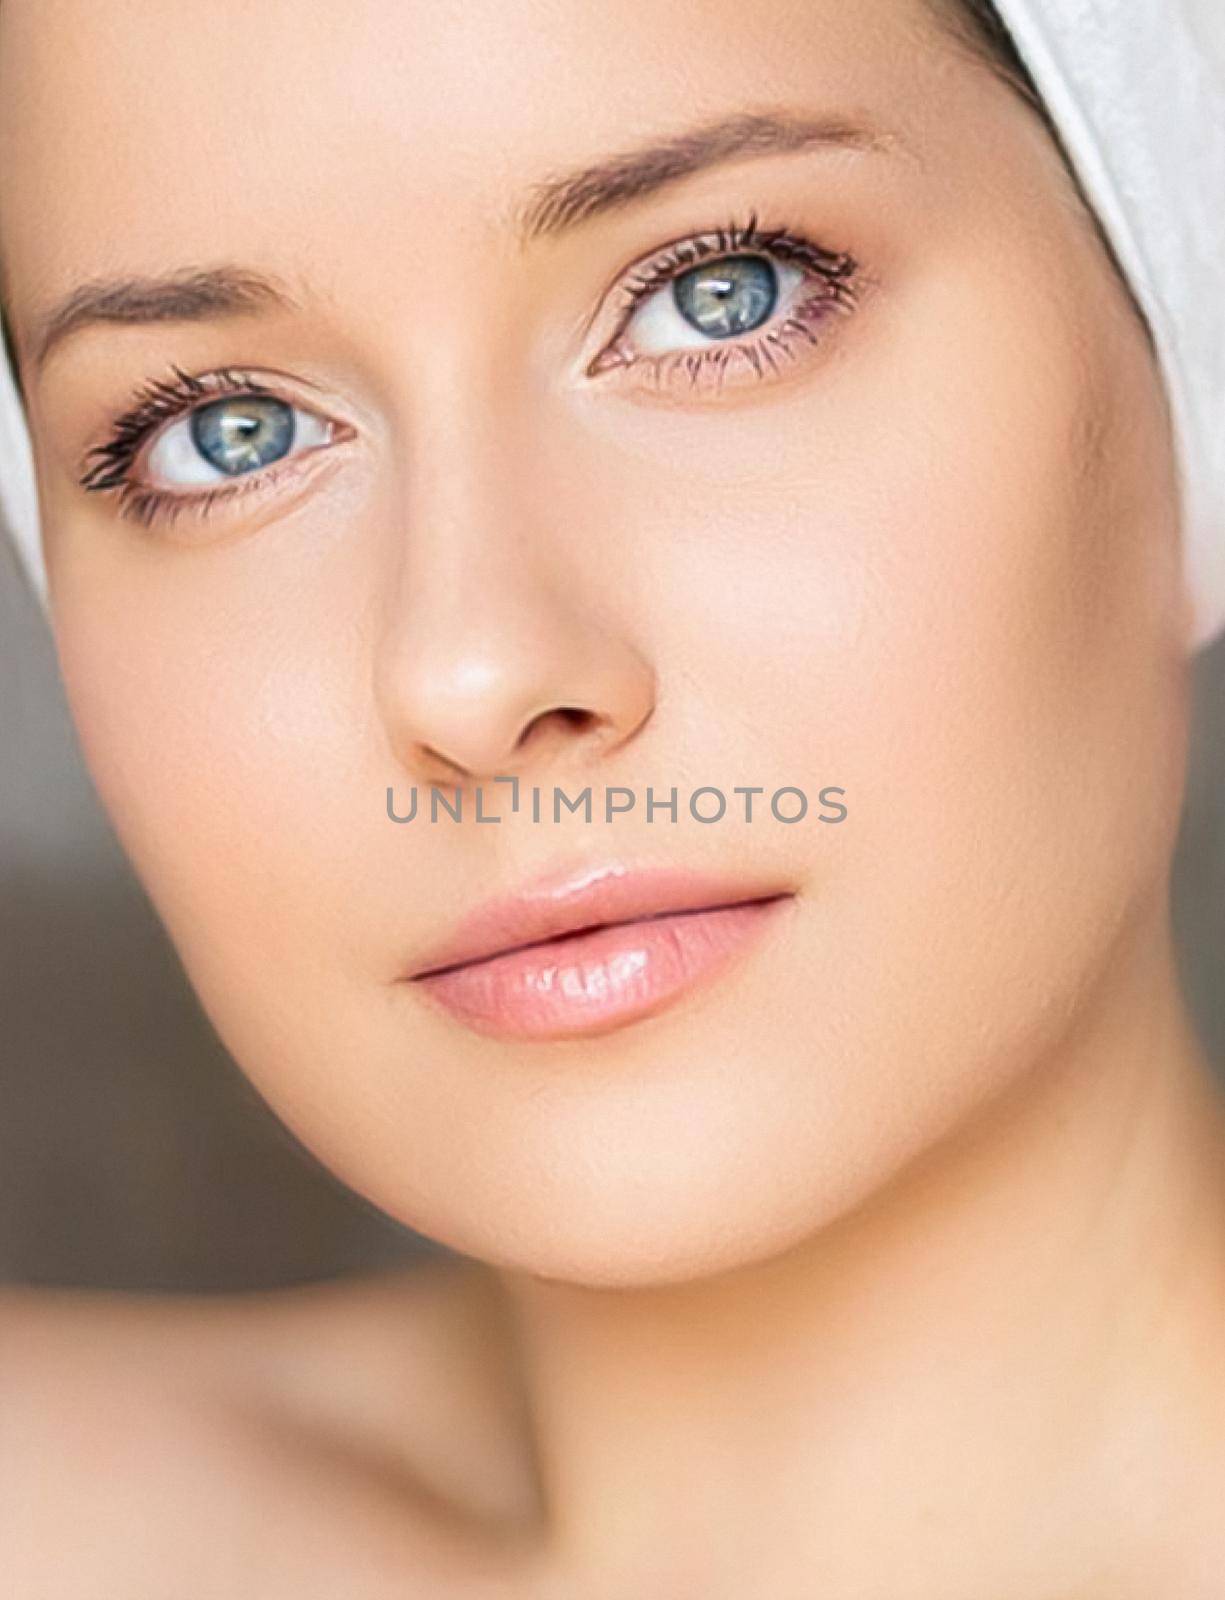 Skin care and beauty routine, beautiful woman with white towel wrapped around head, skincare cosmetics and face cosmetology, close-up portrait